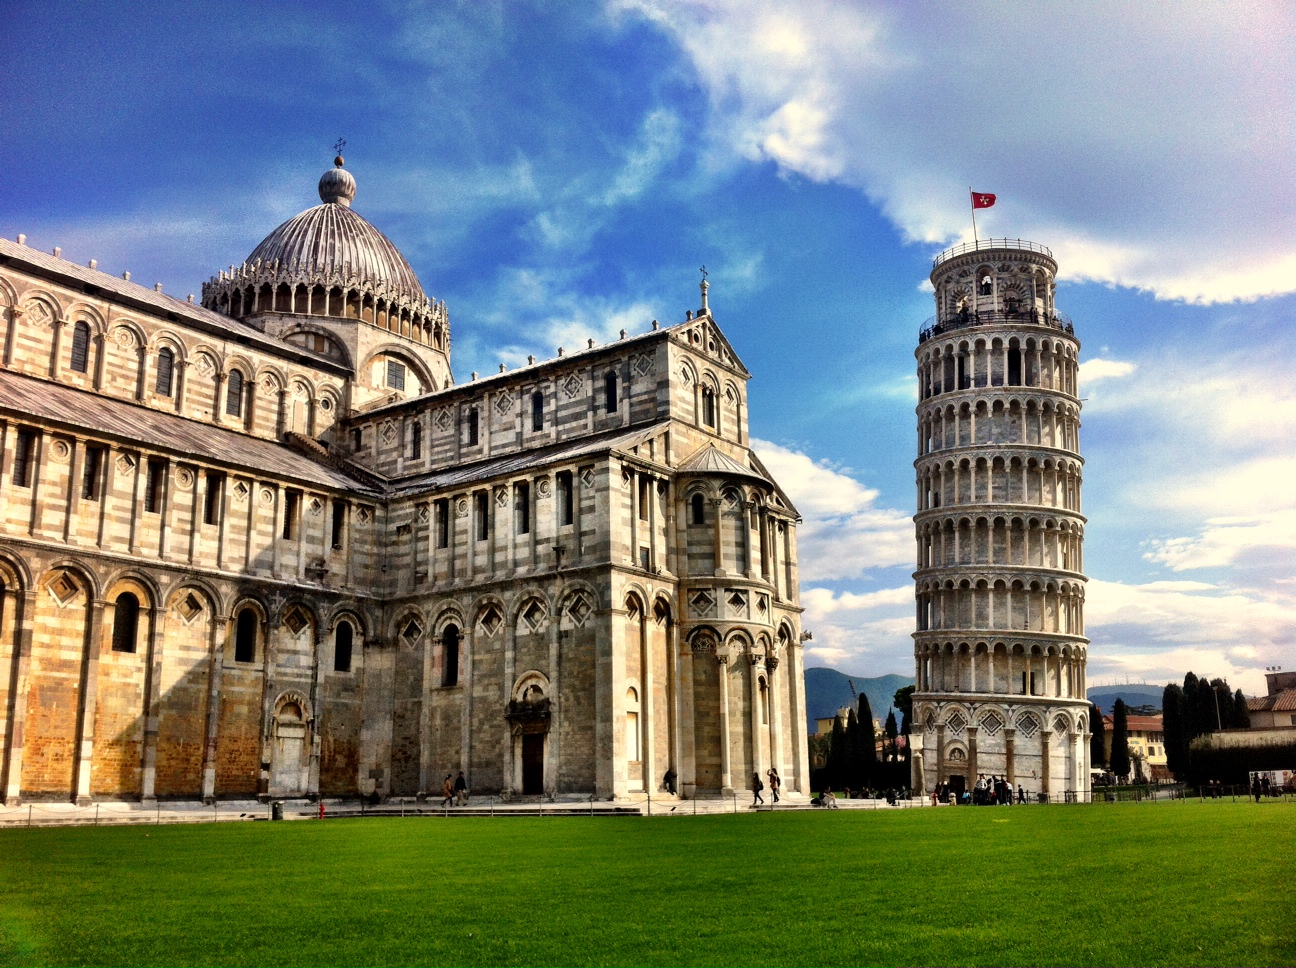 The Leaning Tower of Pisa - Dave Meehan